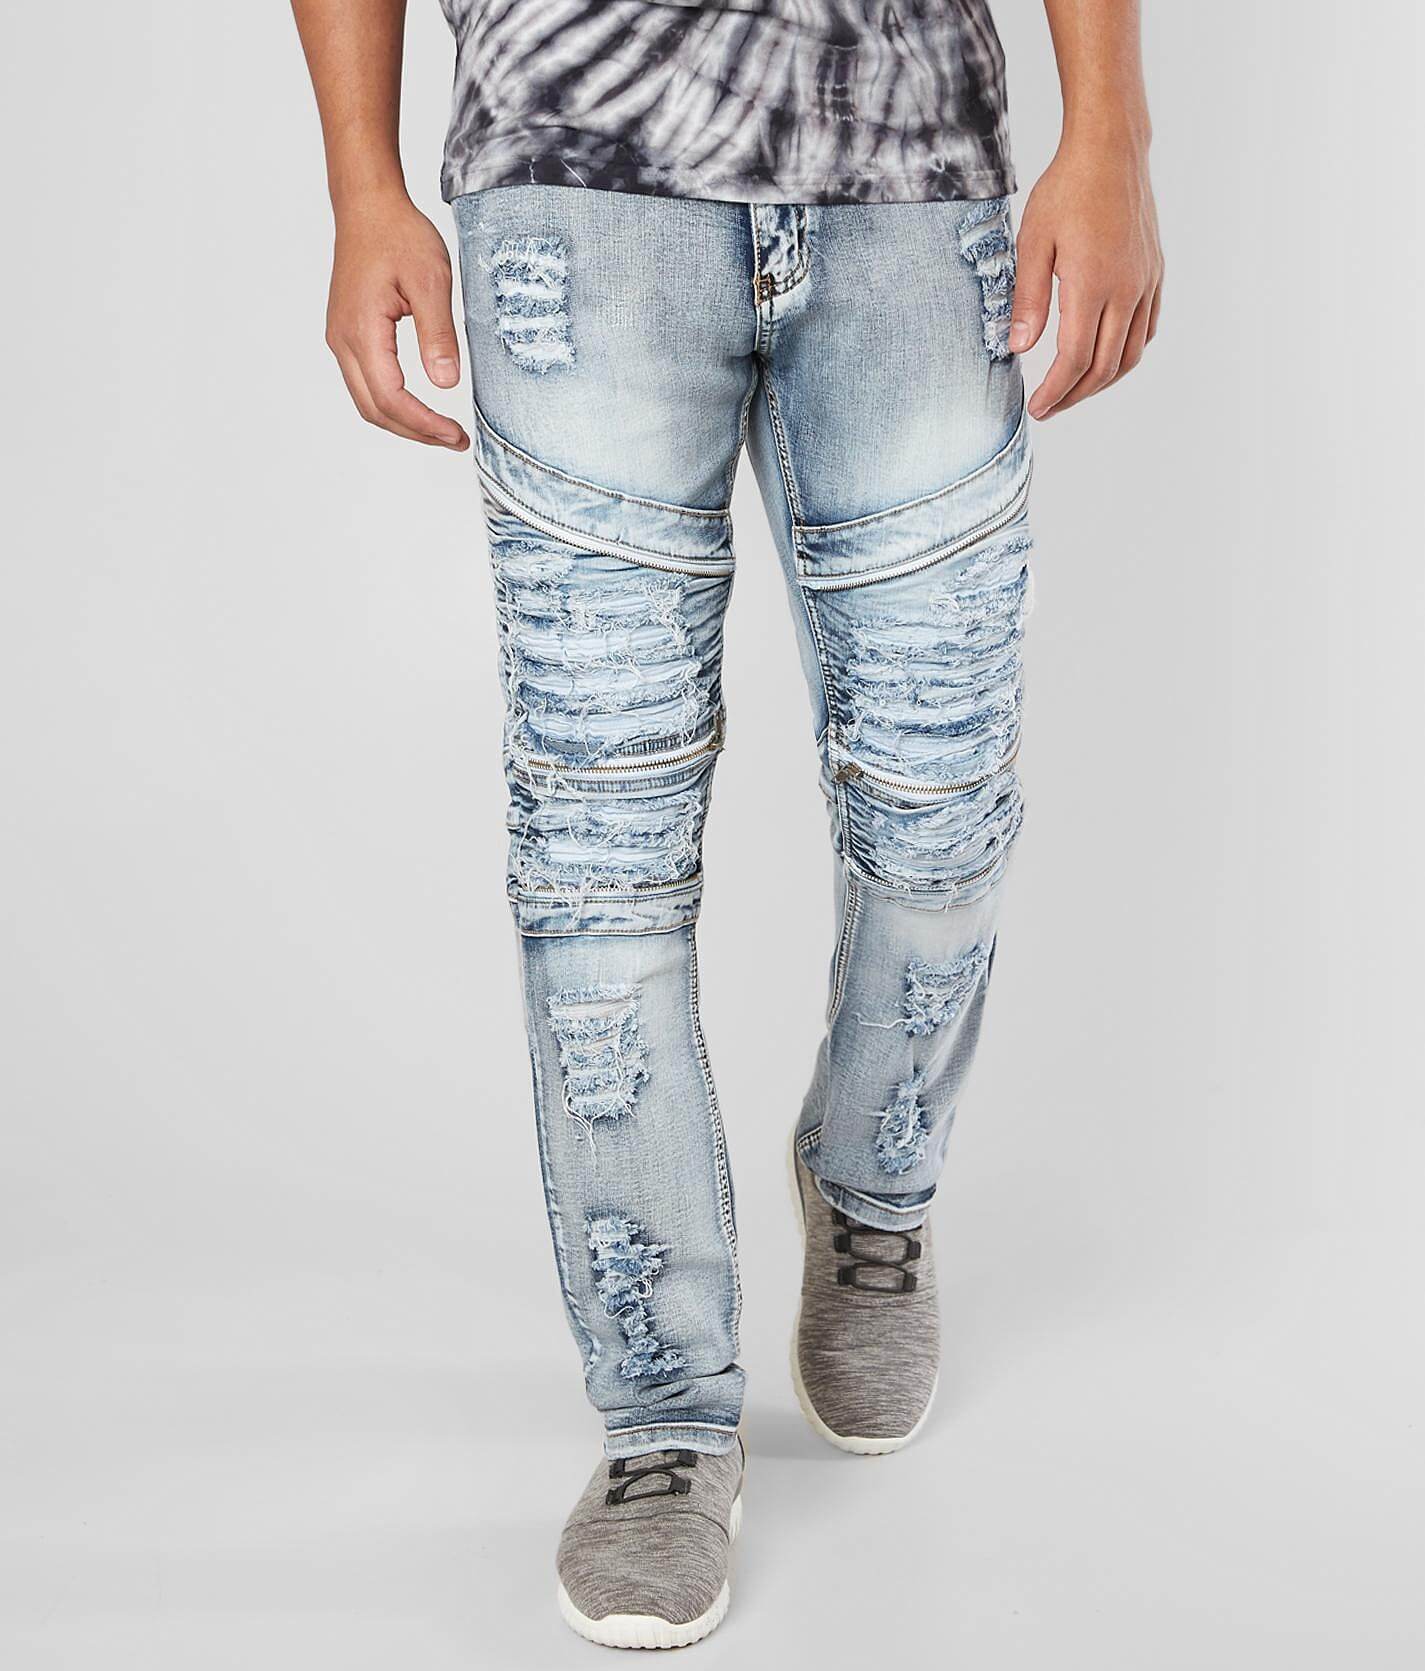 buckle ripped jeans